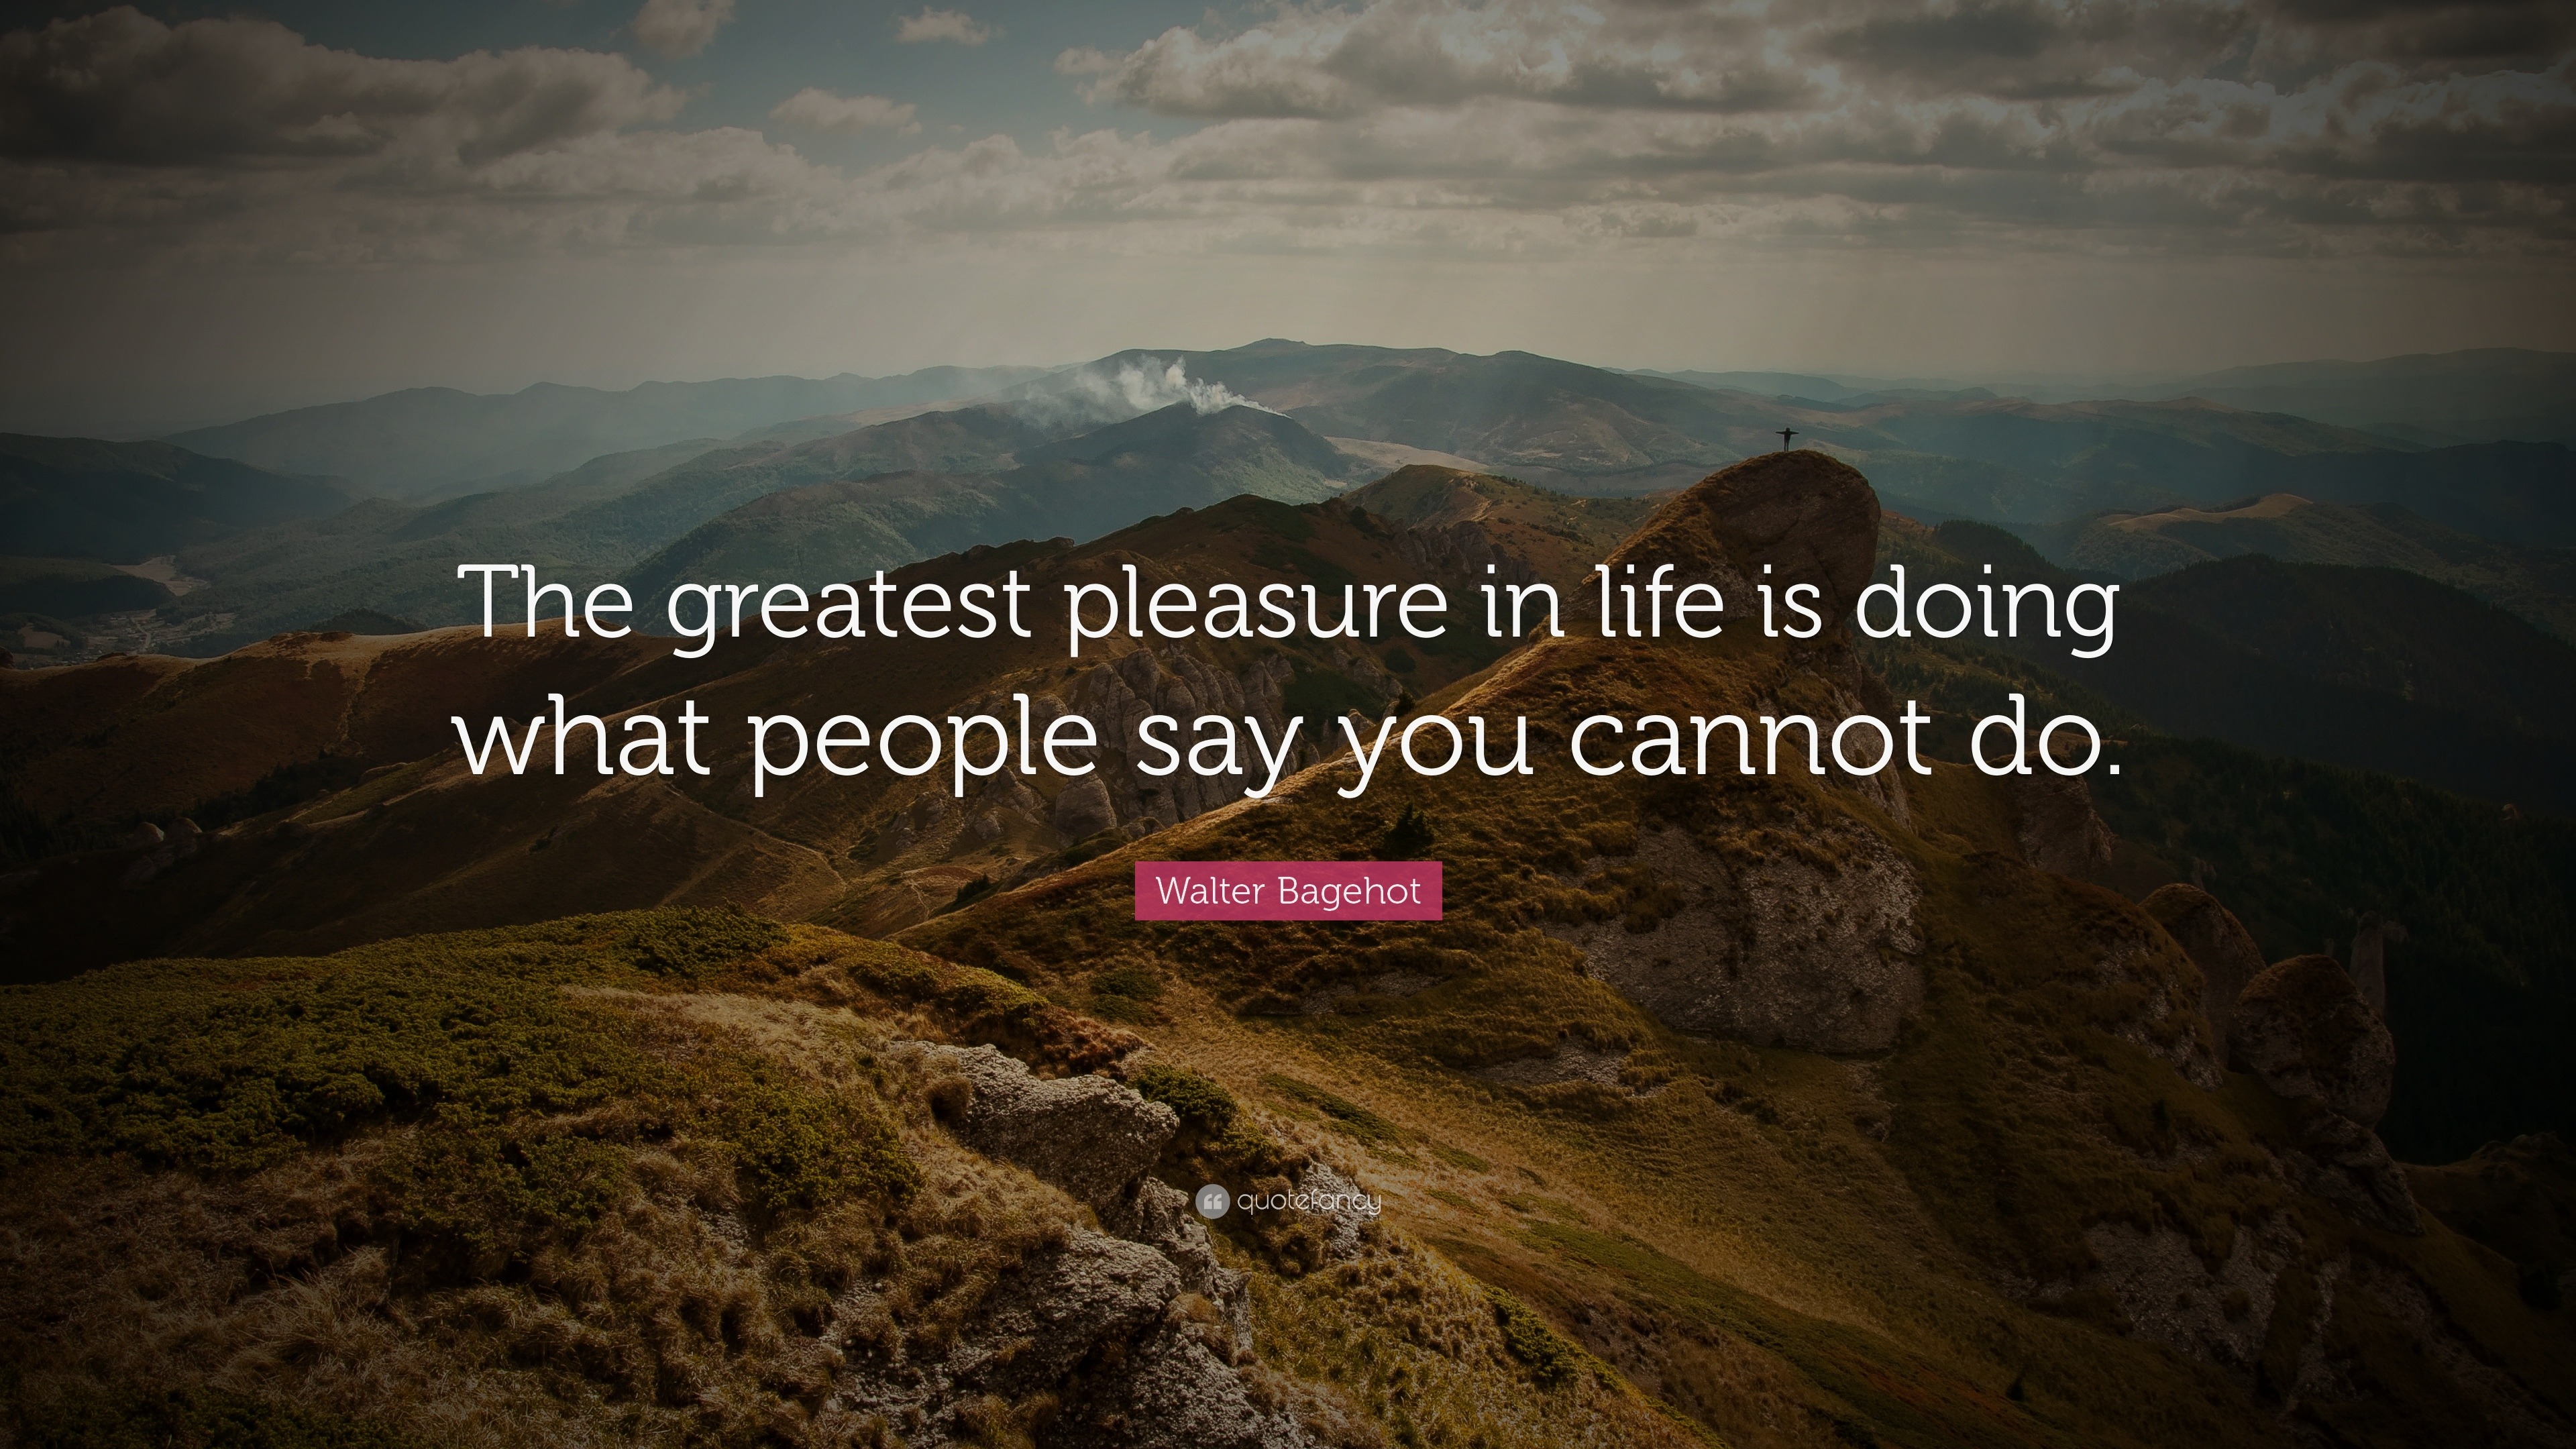 17449 Walter Bagehot Quote The Greatest Pleasure In Life Is Doing What 